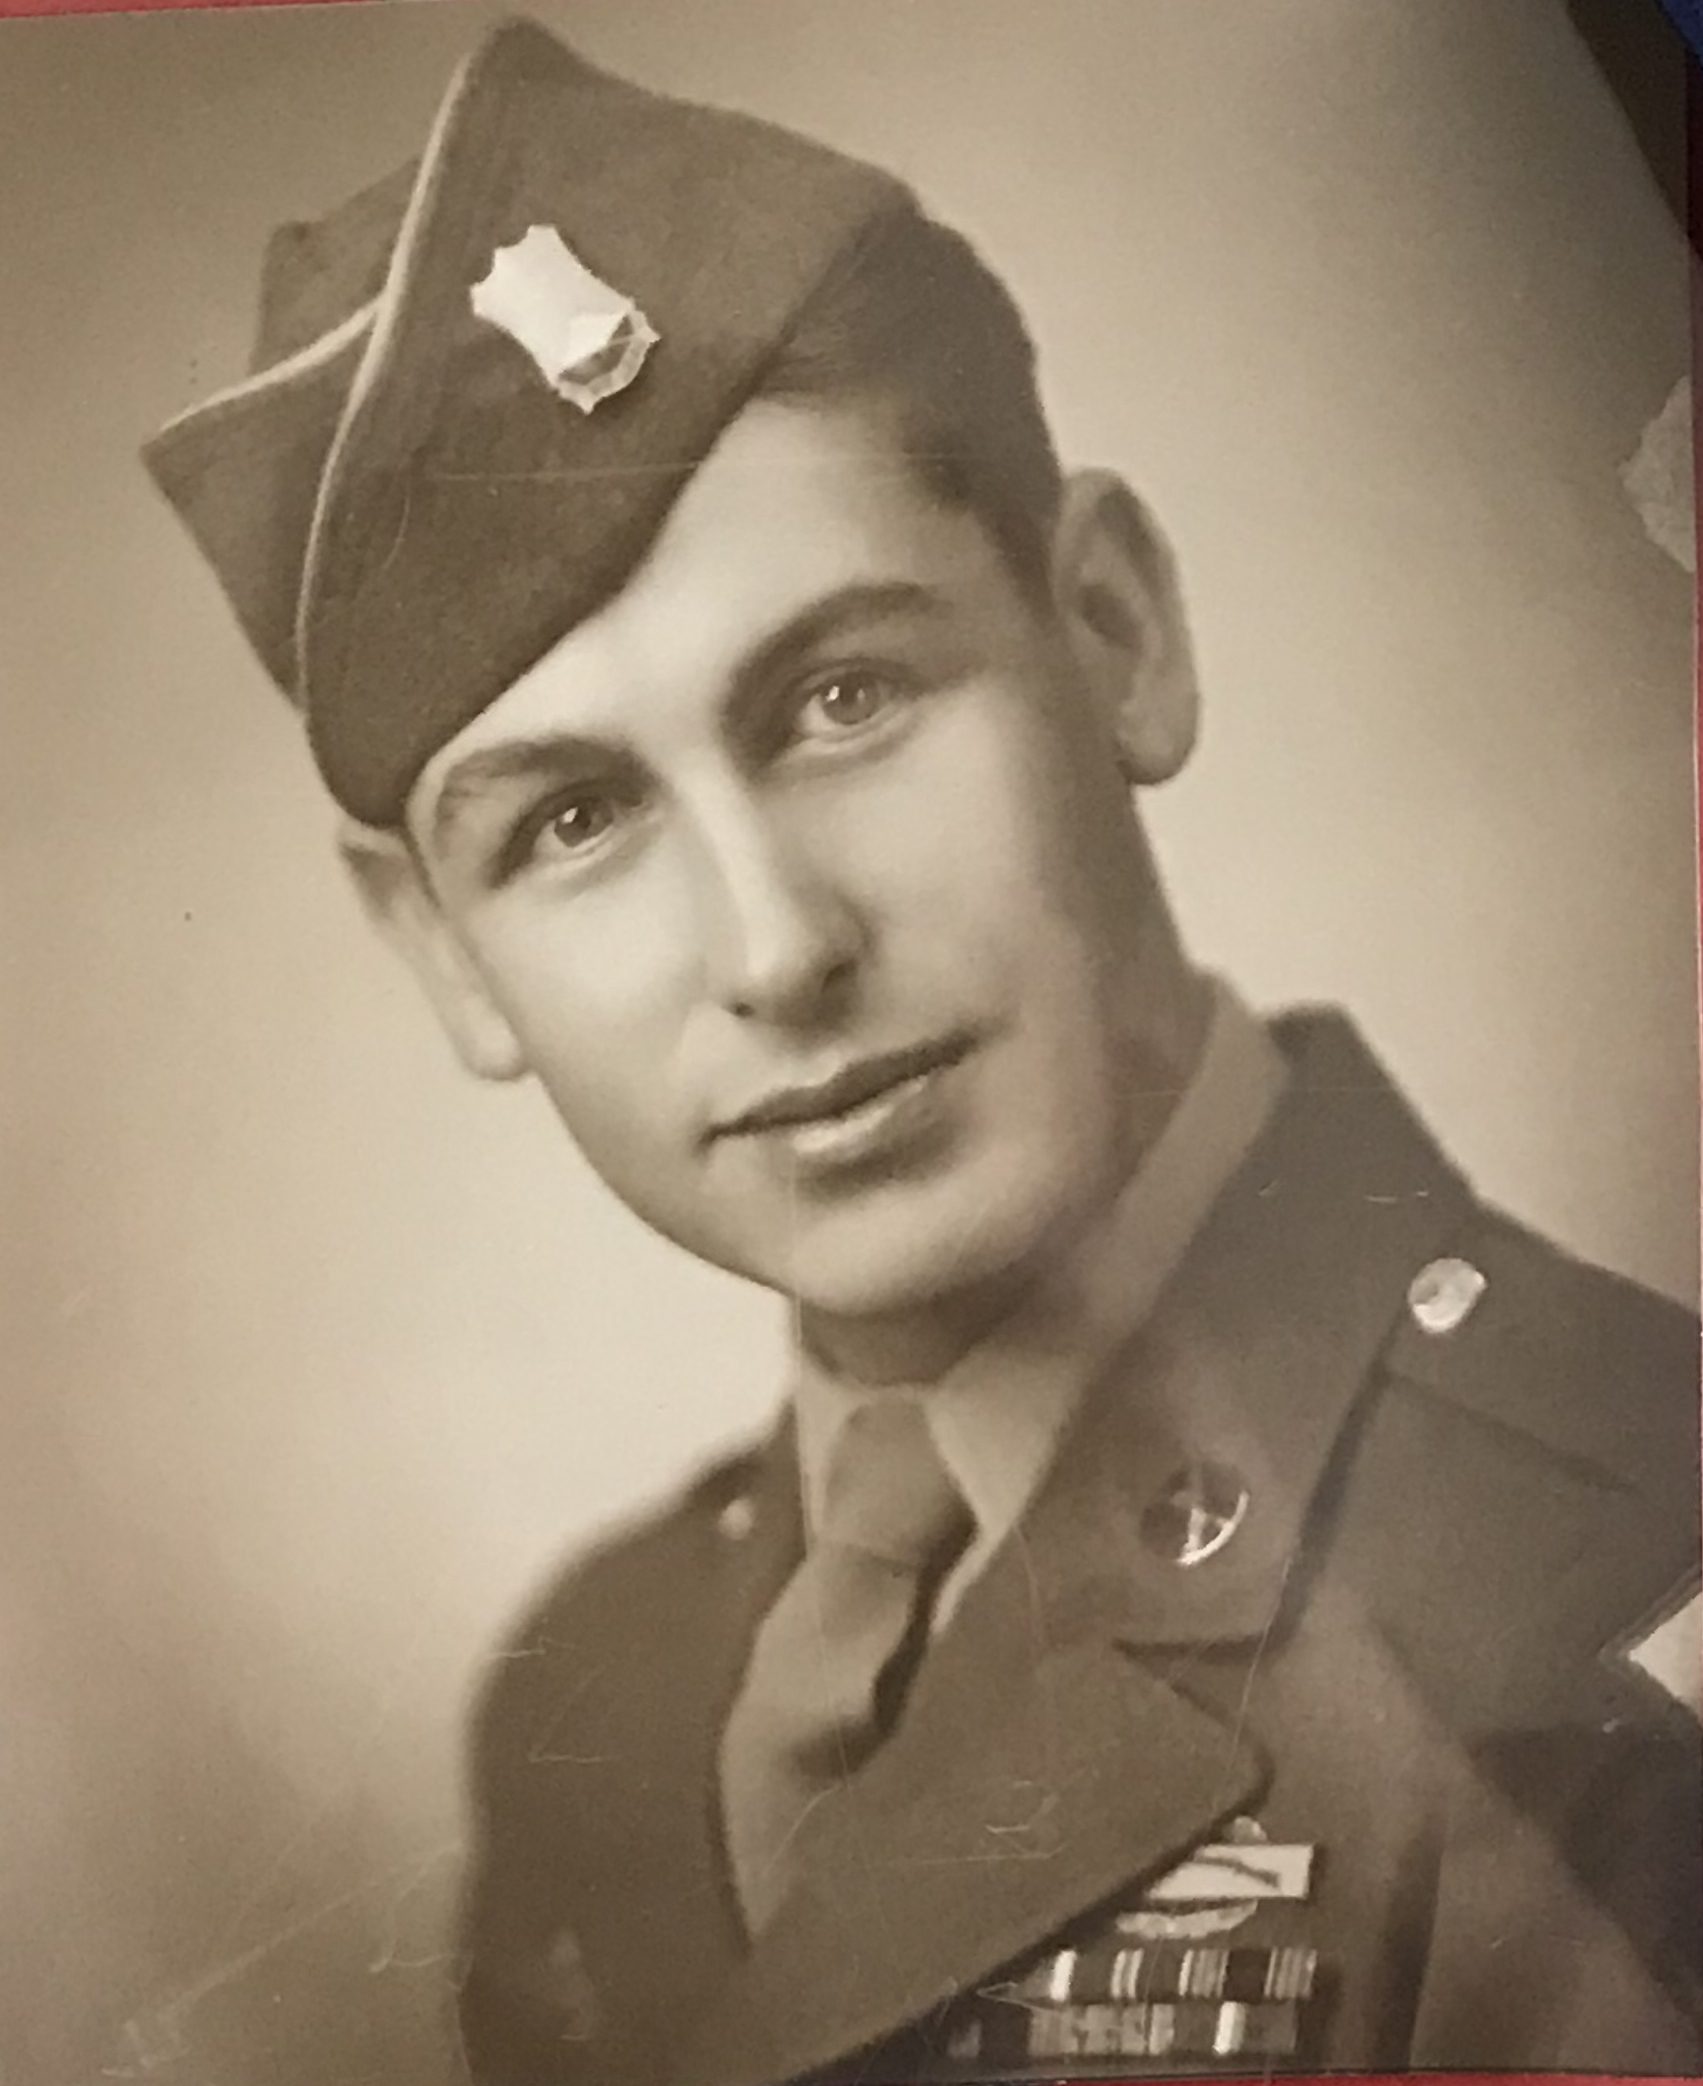 Sgt. Harvey W. Webb 38532089 US Army. He was born on May 26, 1925, the son of Nora and William Webb of Denison, Texas. He worked for the Katy Rail Road before entering the US Army. He entered the US Army on July 22, 1943 at the age of 18. He Trained at Camp Wolters Texas, Camp Adair, Oregon. He trained with the 96th Infantry Division and the 70th Infantry Division. He went to Hawaii as part of the advance detachment of 96th Infantry Division in 1944. He was later assigned to Company A, 382nd Infantry Regiment, 96th Infantry Division. He fought on Leyte, Southern Philippines and Okinawa. He was wounded 3 time the last time he had a Japanese hand grenade explode on his stomach, he went to the field hospital and was patched up and returned to Oboe hill, Okinawa, a few hours later. He remained with A Company until they were taken off the line. He was discharged January 11, 1946 at Fort Sam Houston Texas. He was awarded the Purple Heart Medal (PHM), The Combat Infantry Badge (CIB), The American Campaign Medal, the Asiatic Pacific Campaign Medal (PTO), and the World War Two Victory Medal. Later in life he was the President of the Texas chapter of the Military Order of the Purple Heart, and he got Interstate 35 named Purple heart trail, in honor of all the Texans that were killed in action like his cousin PFC Harvey R Manor.